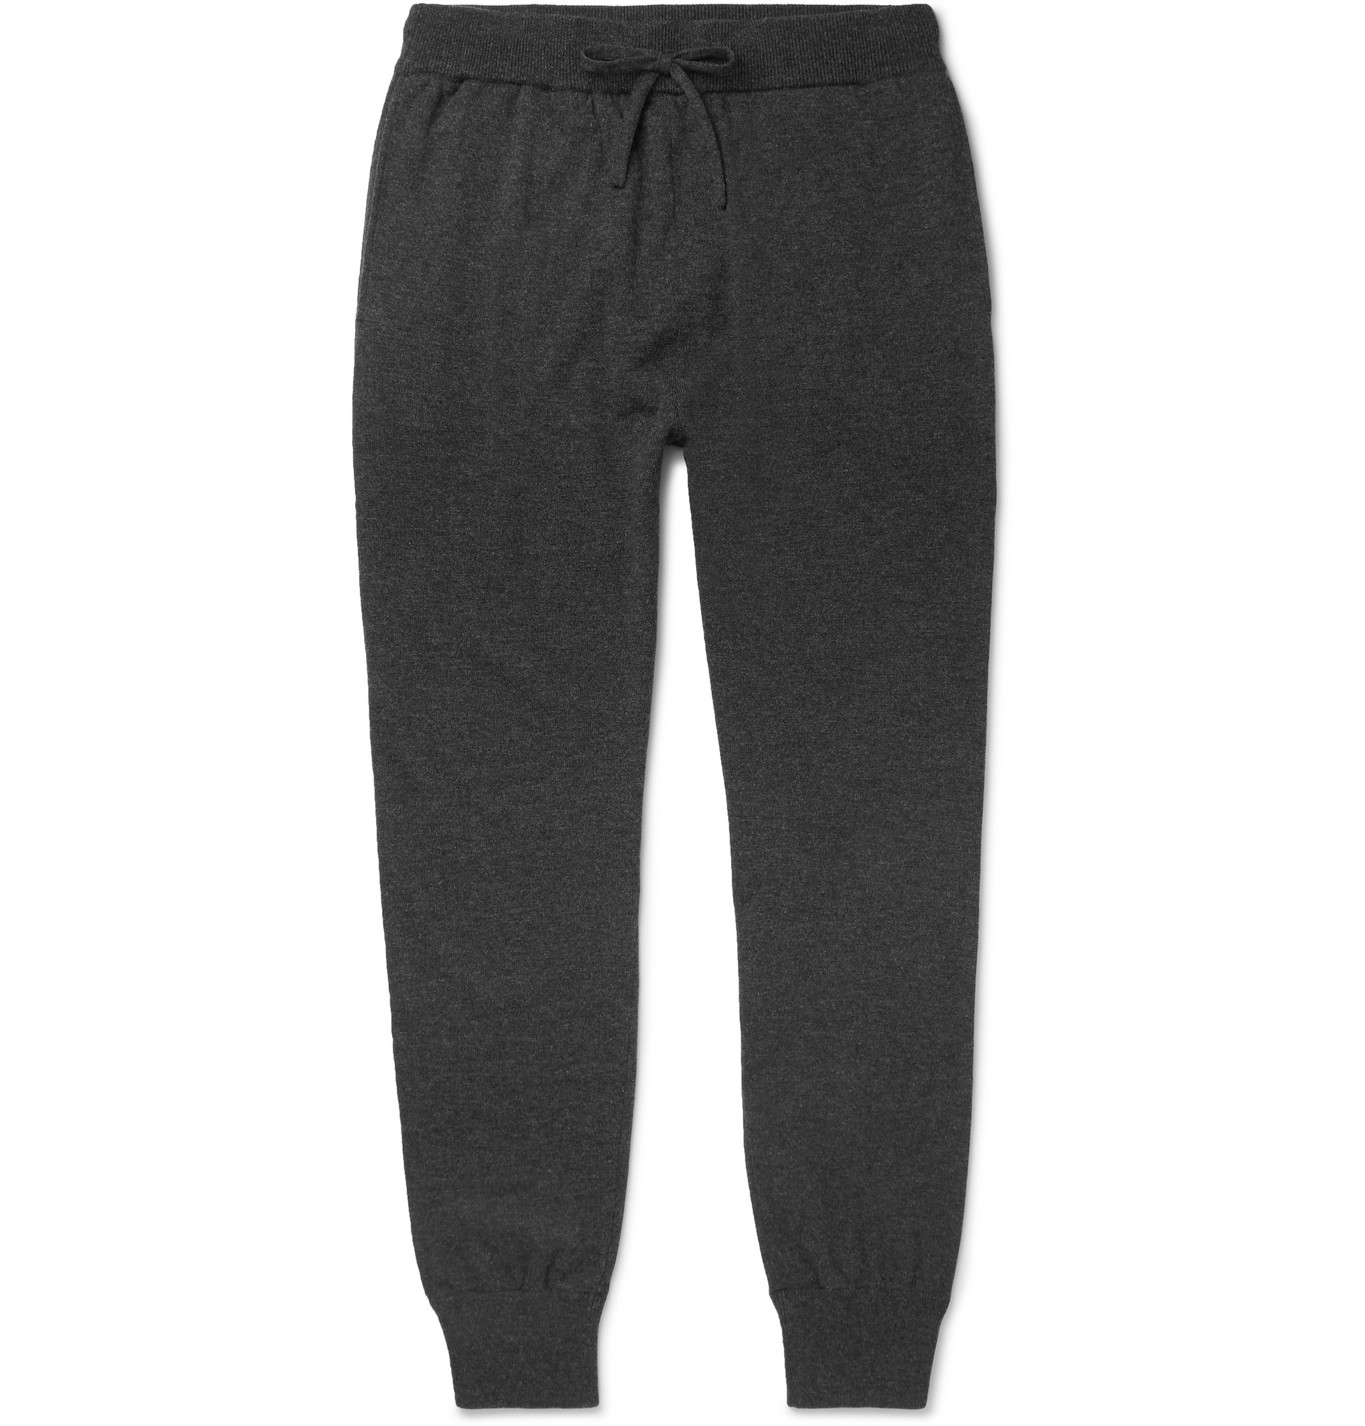 Mr P. - Slim-Fit Tapered Mélange Wool and Cashmere-Blend Sweatpants ...